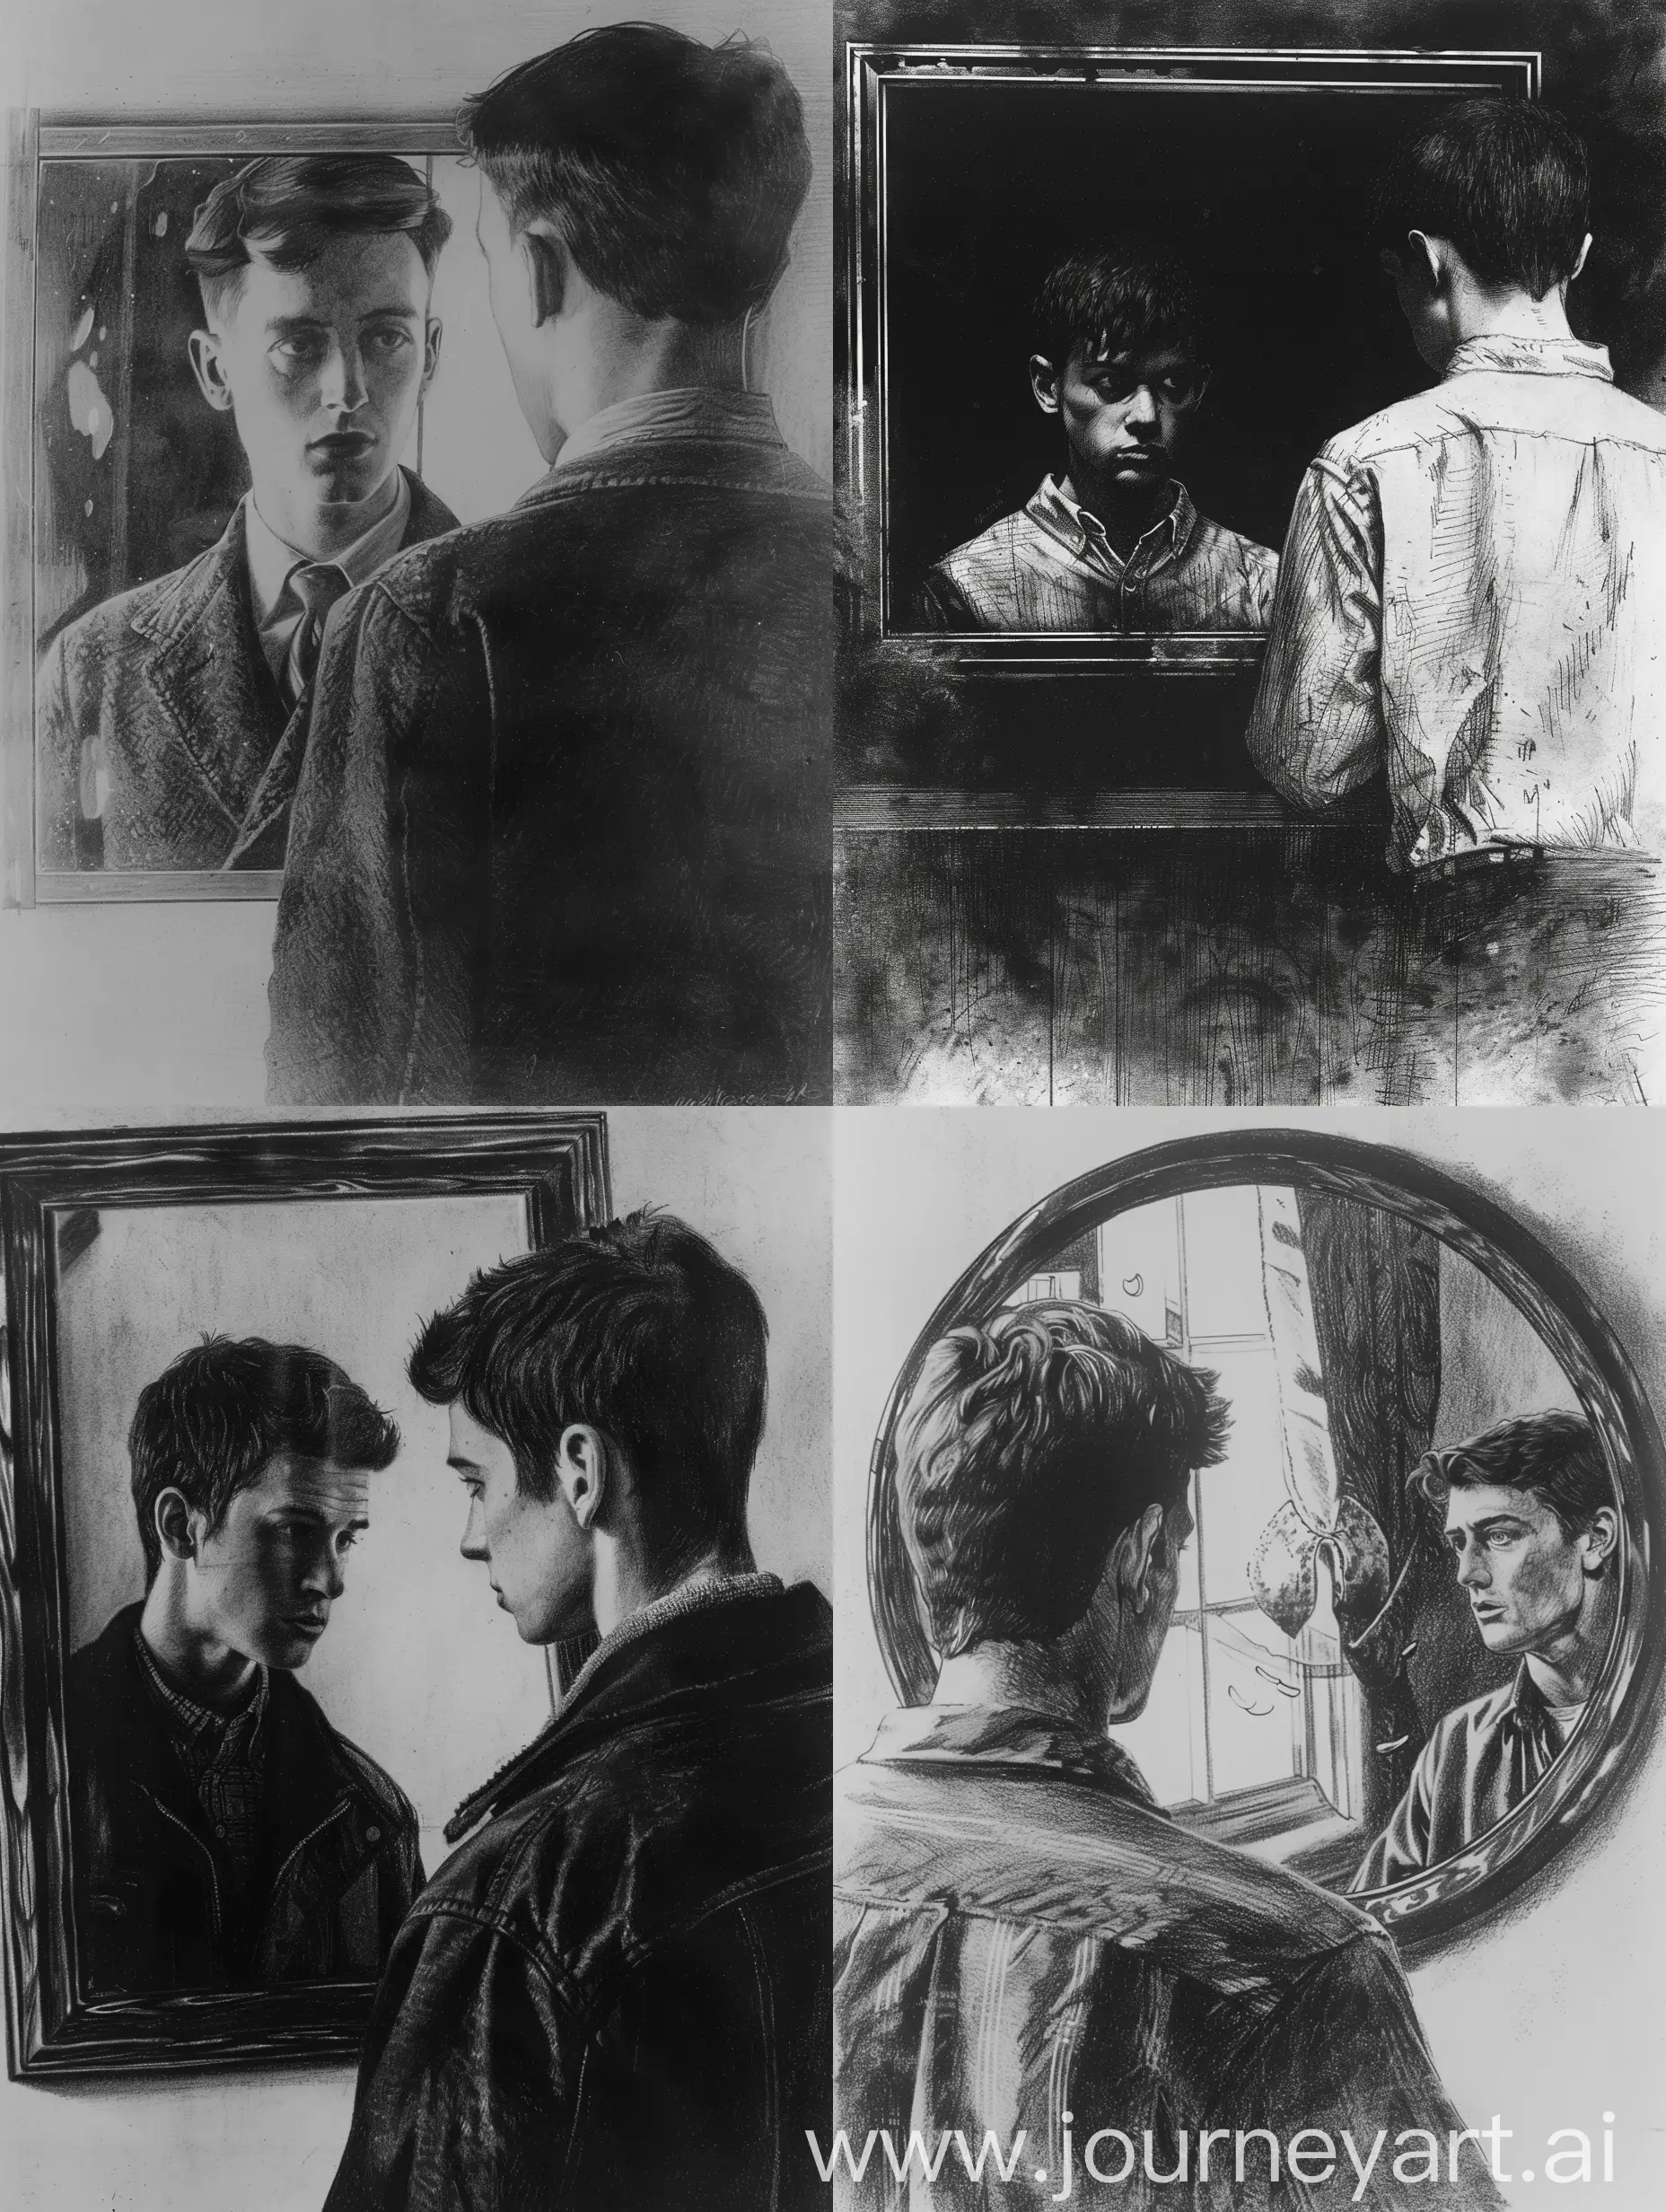 Monochrome-Drawing-of-Mans-Reflection-in-a-Mirror